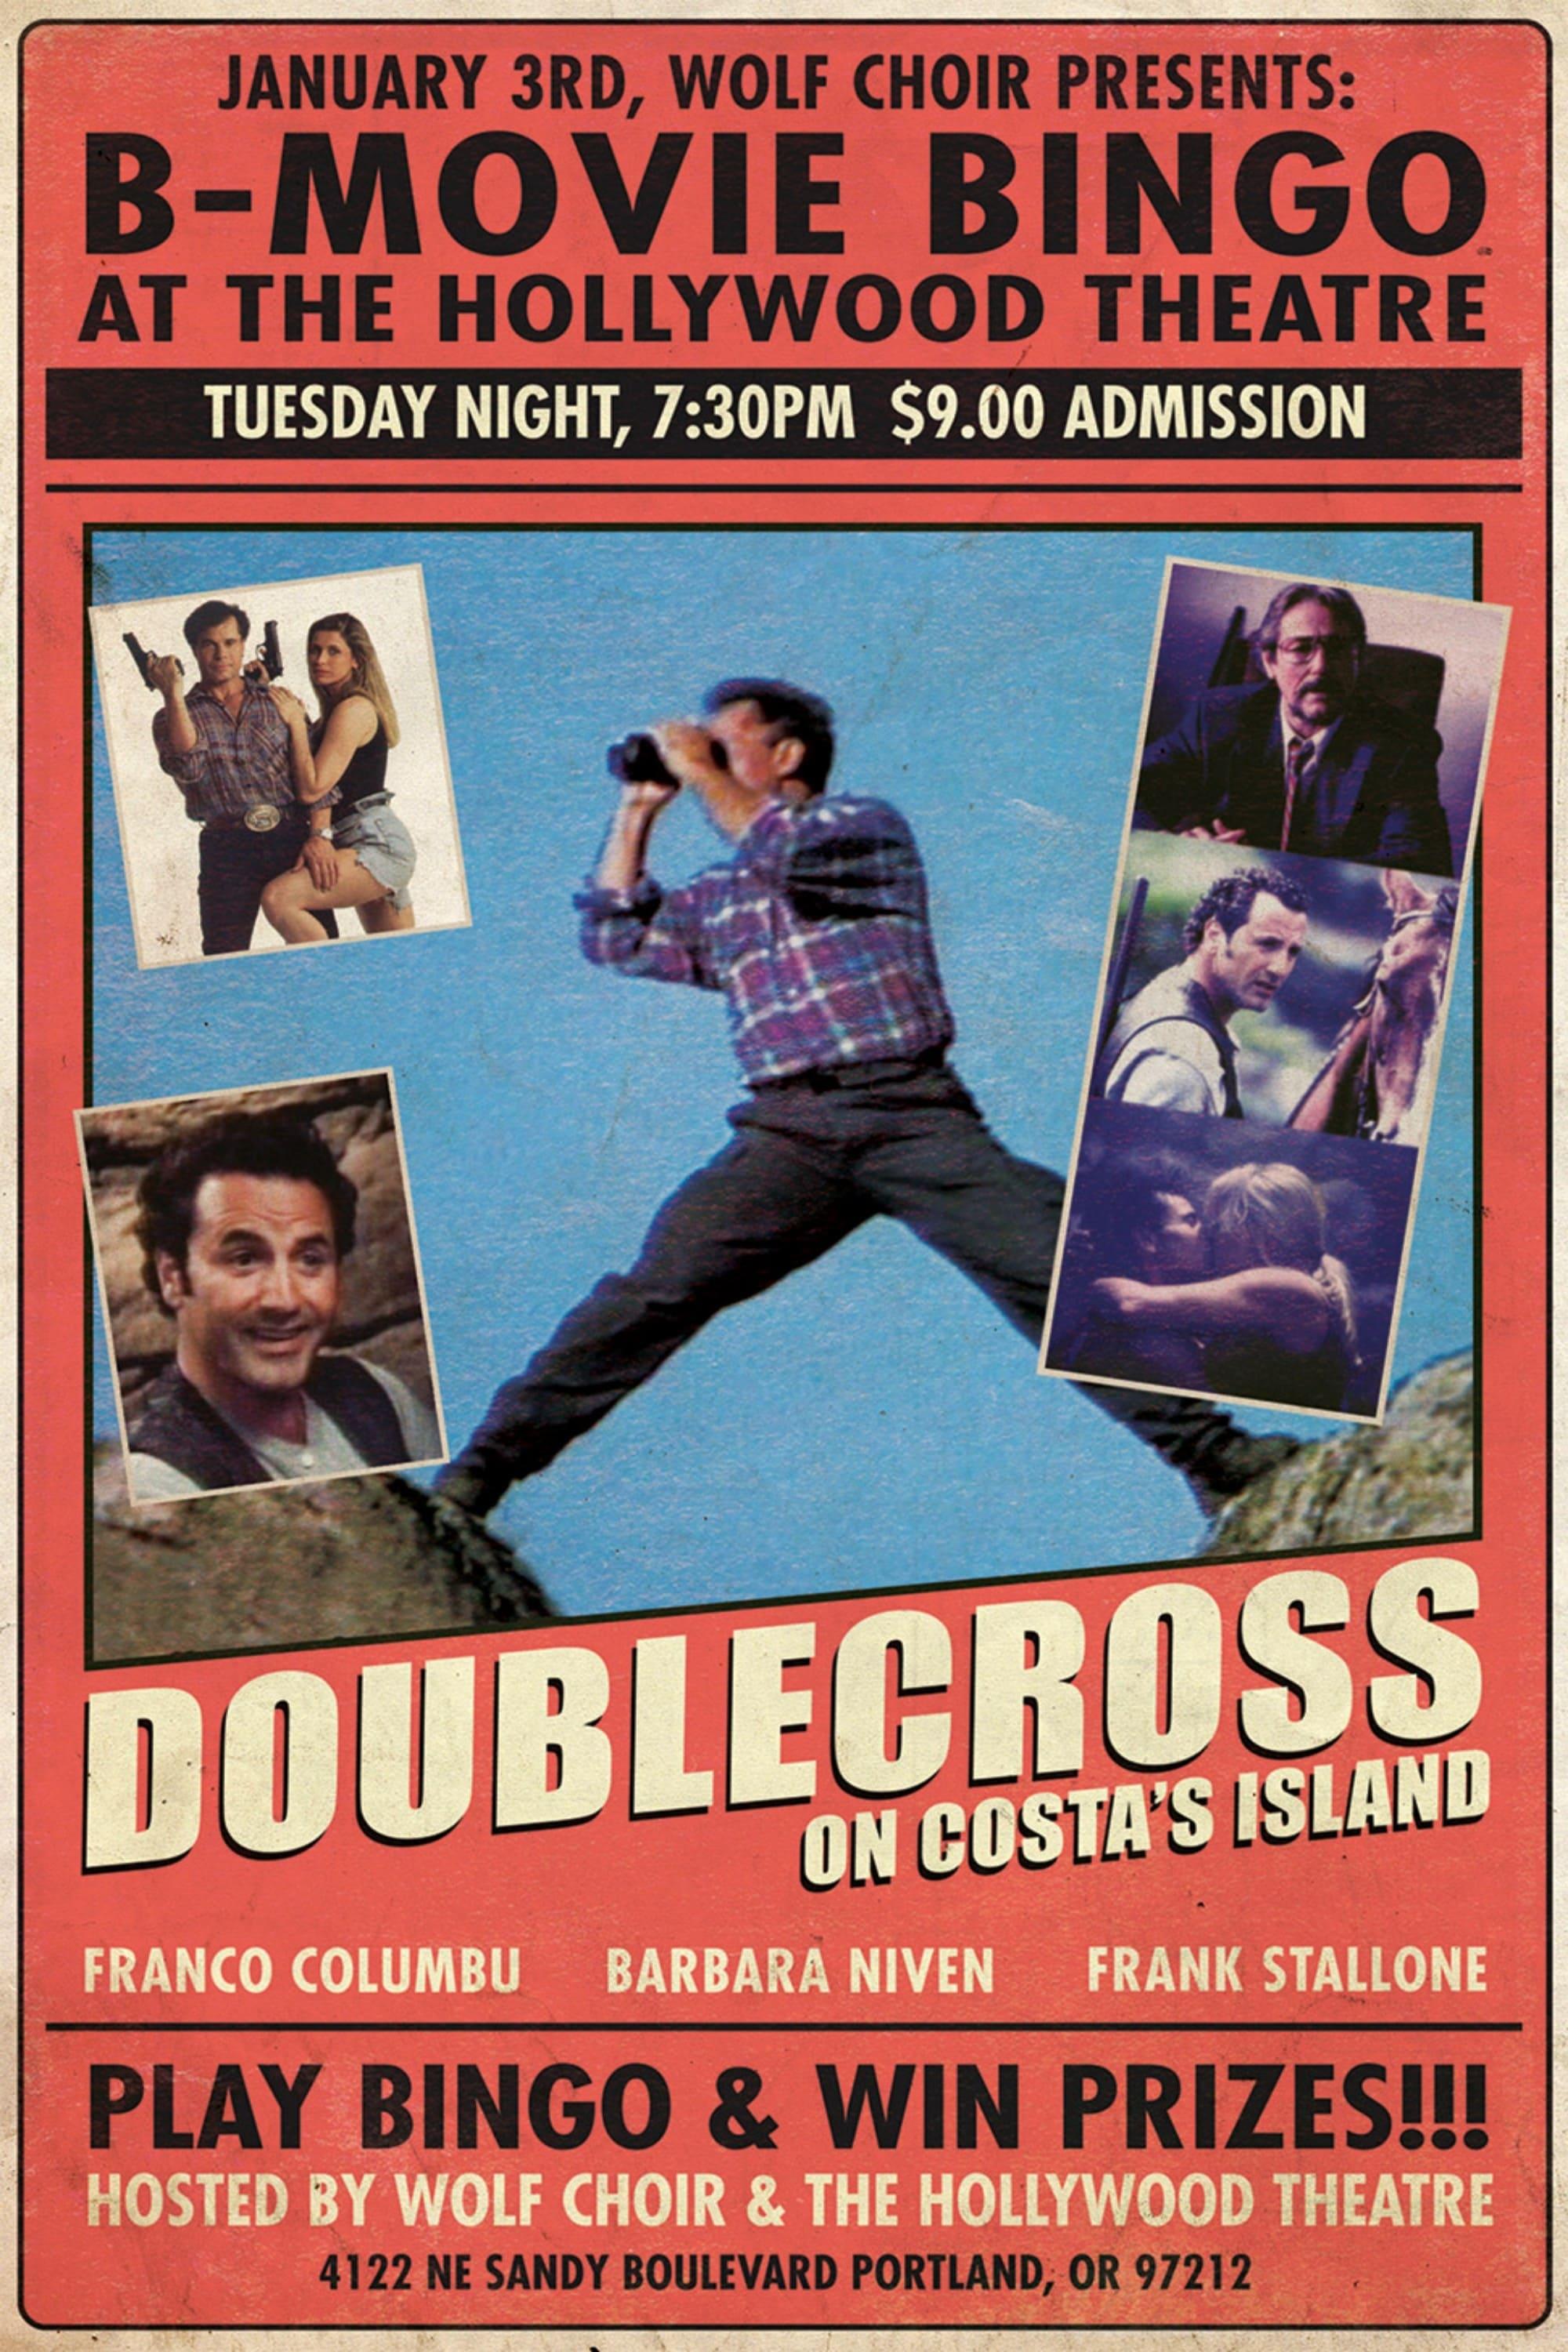 Doublecross on Costa's Island poster